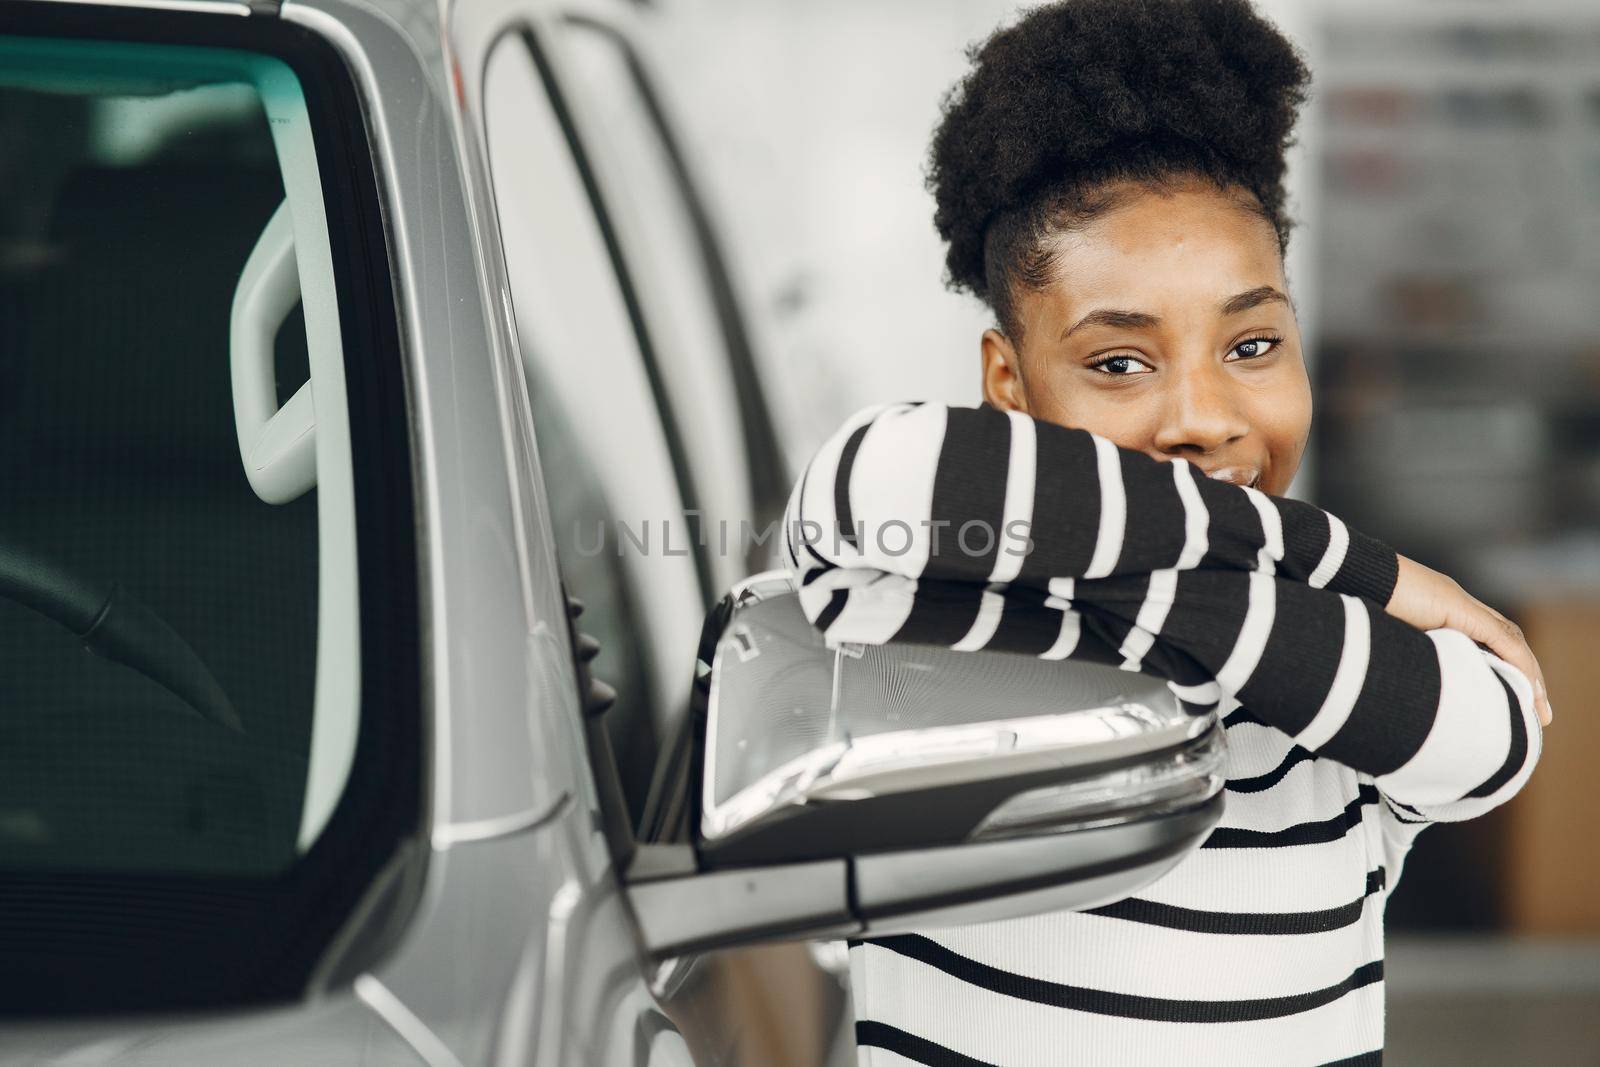 Went shopping today. Shot of an attractive African woman shooses a car.